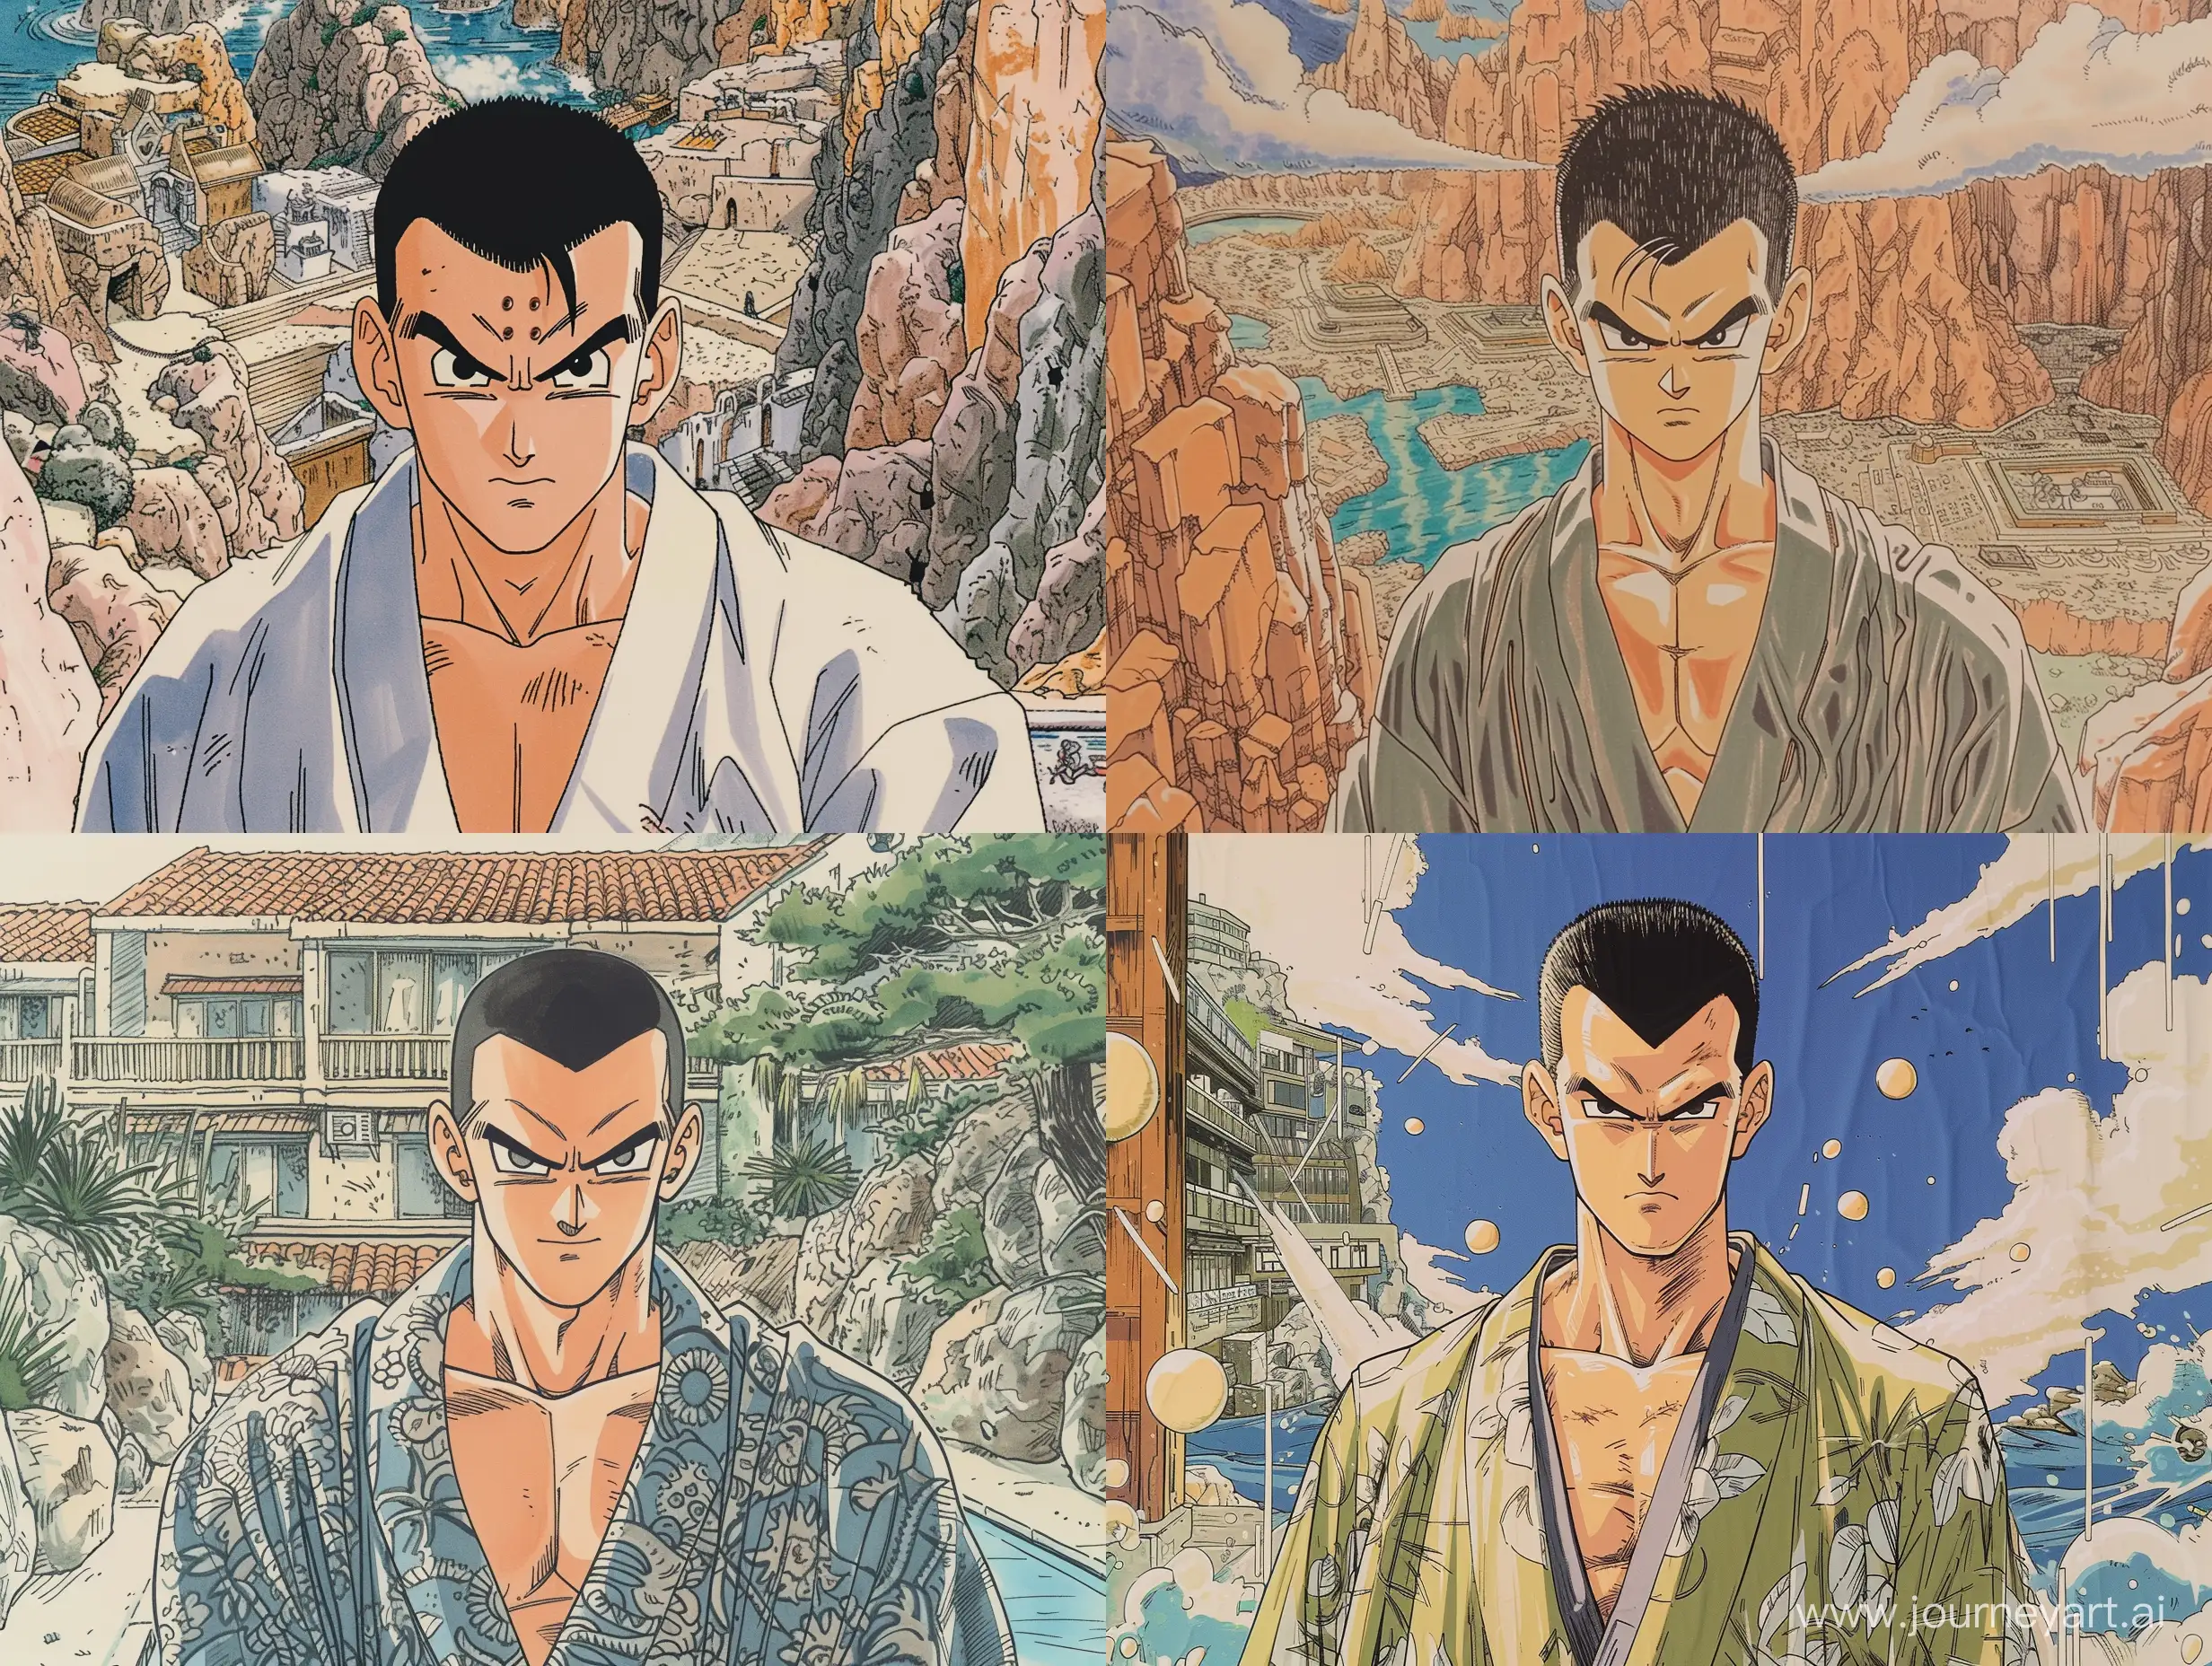 Akira Toriyama's manga style depicts a man wearing a robe in a Dragon Ball Z environment. The artwork is colored and features the man looking at the viewer with short hair, characteristic of the 90s visuals.

